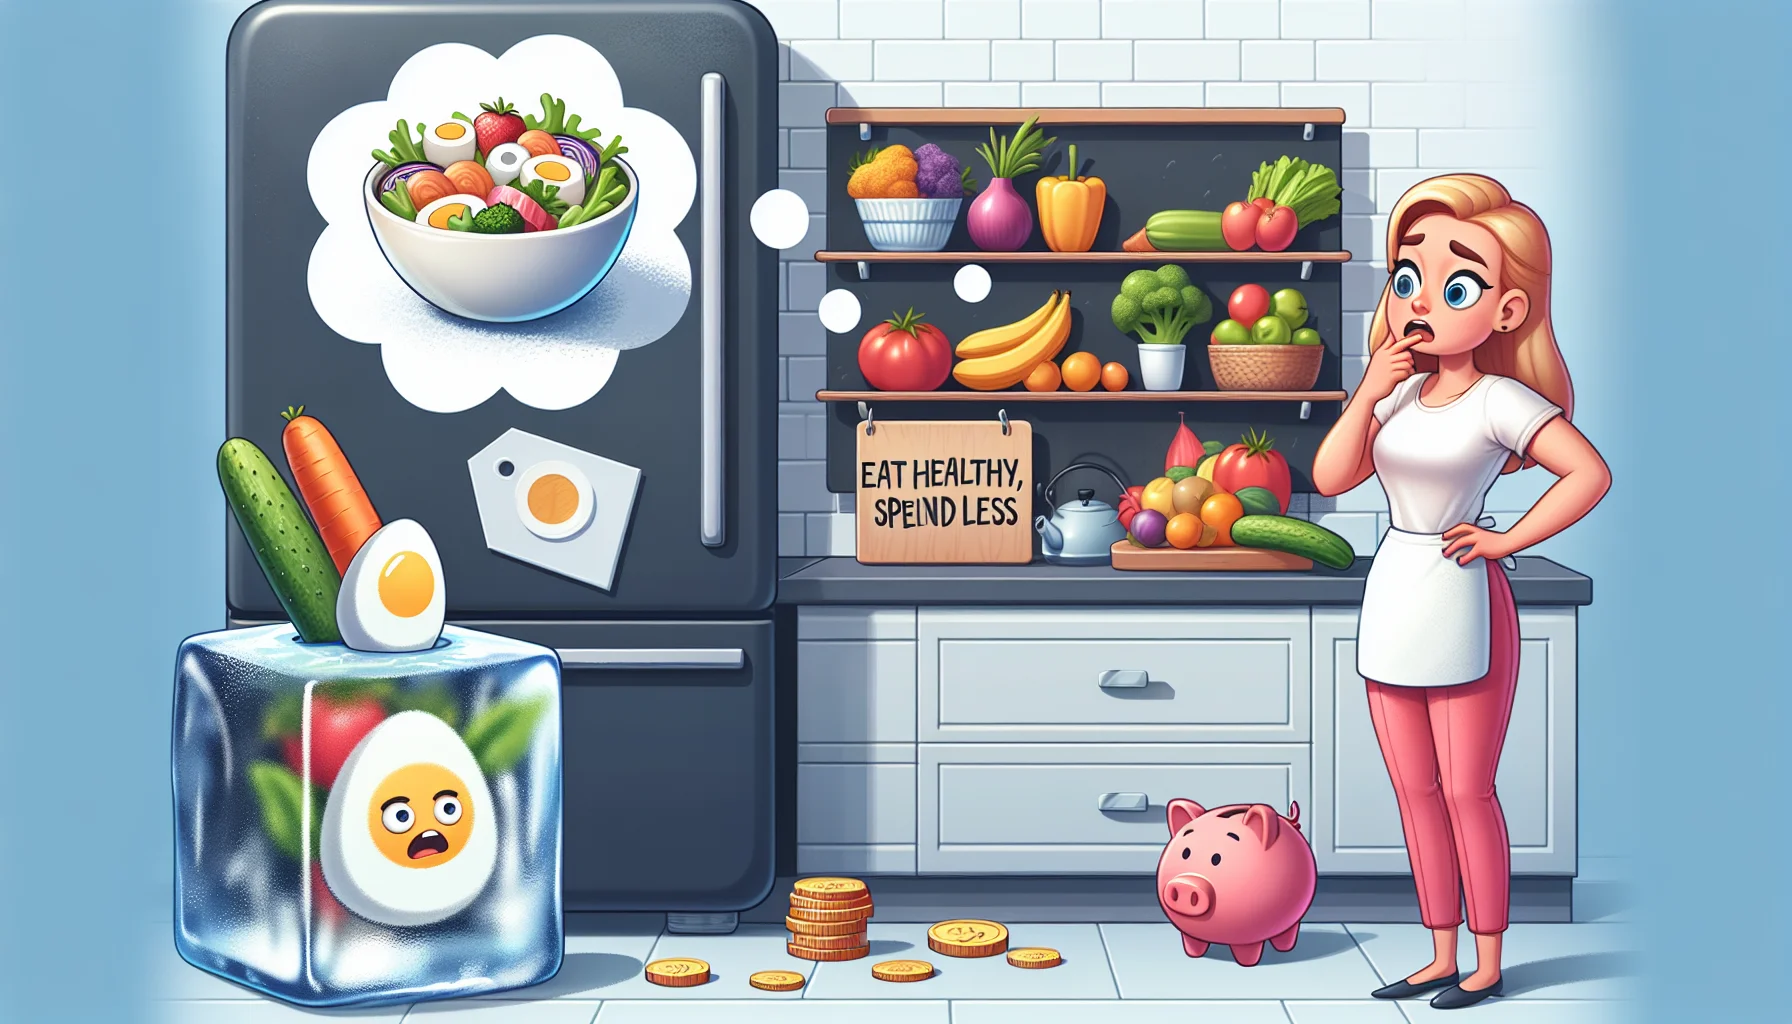 Create an amusing and realistic scene where a character has managed to freeze an egg salad in a large ice cube. The character could be a Caucasian woman with a surprised expression, standing in a kitchen full of fresh fruit and vegetables, suggesting a healthy alternative. A thought bubble over the character's head could show a piggy bank growing denser with coins, implying saving money. A sign on the fridge could say 'Eat Healthy, Spend Less', adding to the theme. The overall atmosphere should be light, fun and encouraging towards healthy eating and saving money.